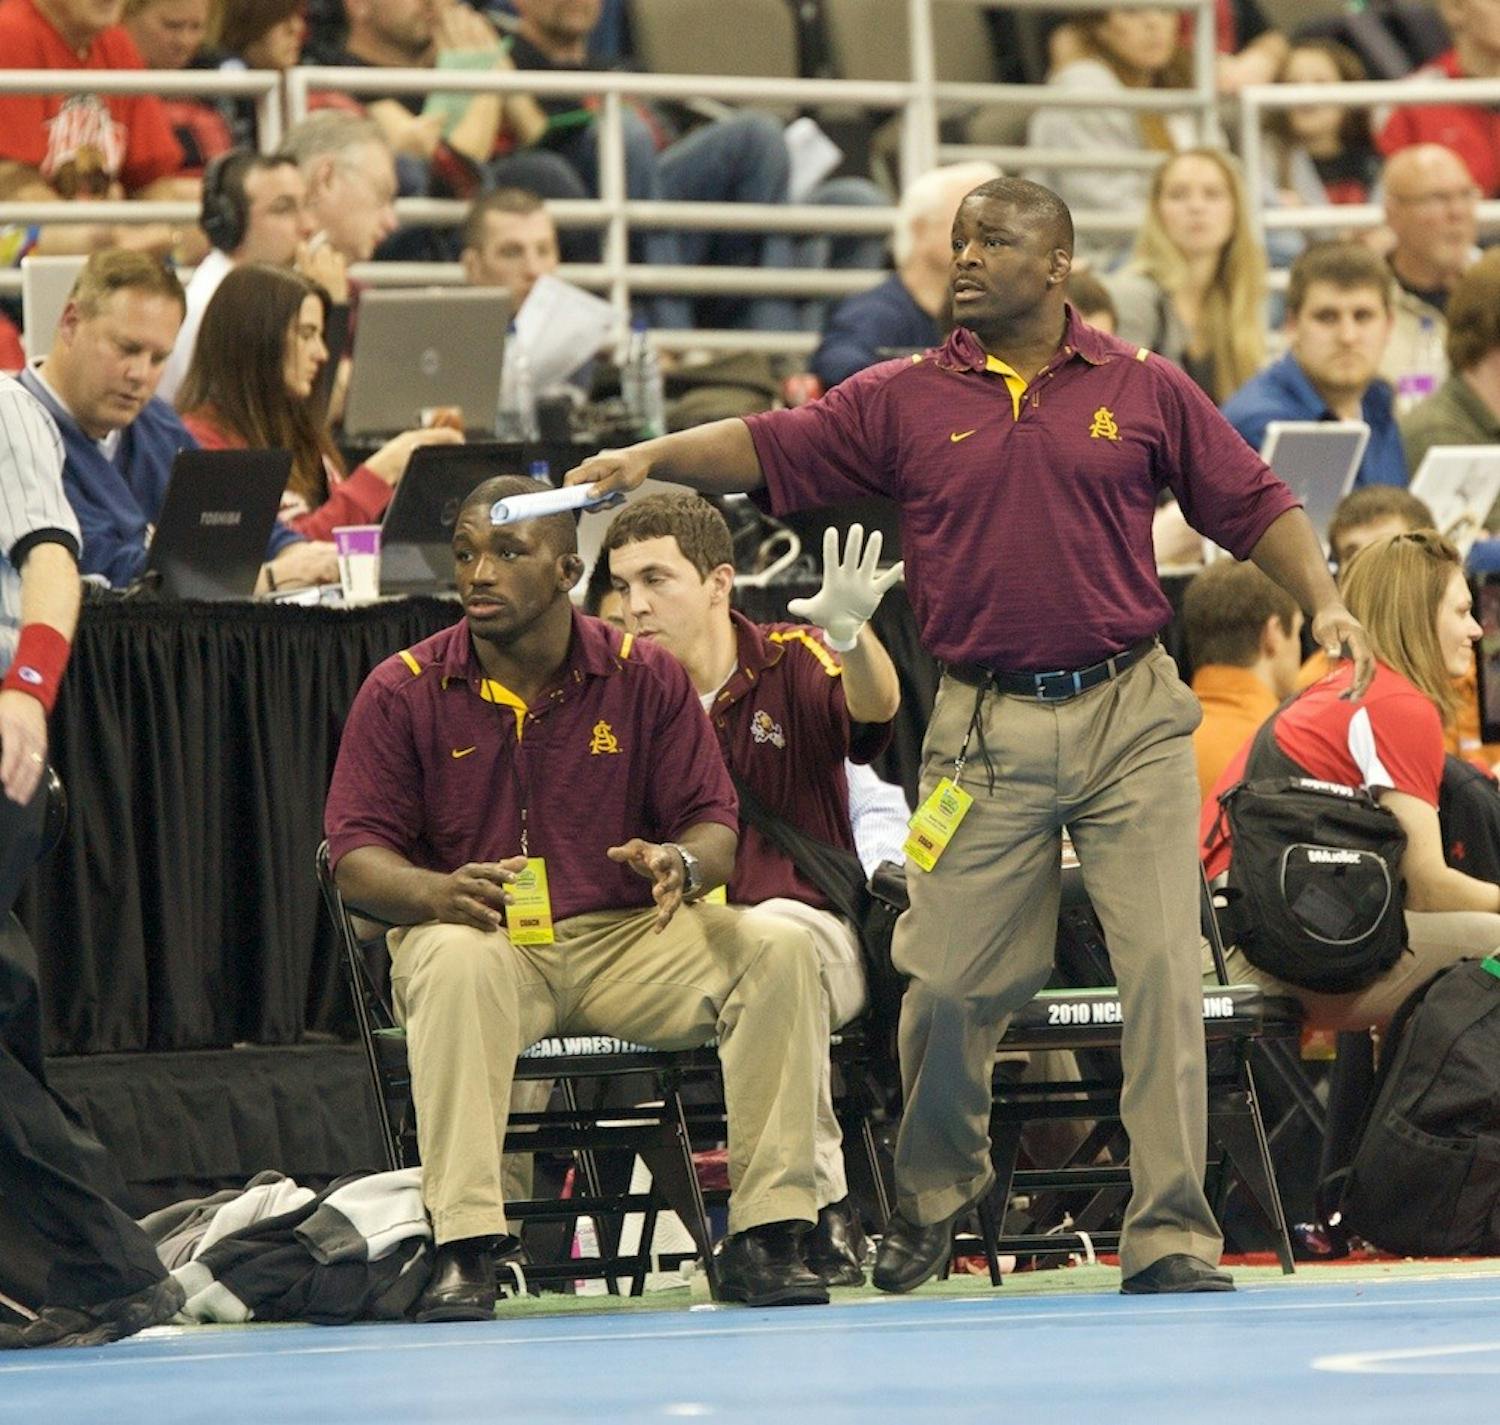 ASU coach Shawn Charles directs his team during the 2010 NCAA Championships. (Photo Courtesy of ASU Media Relations)